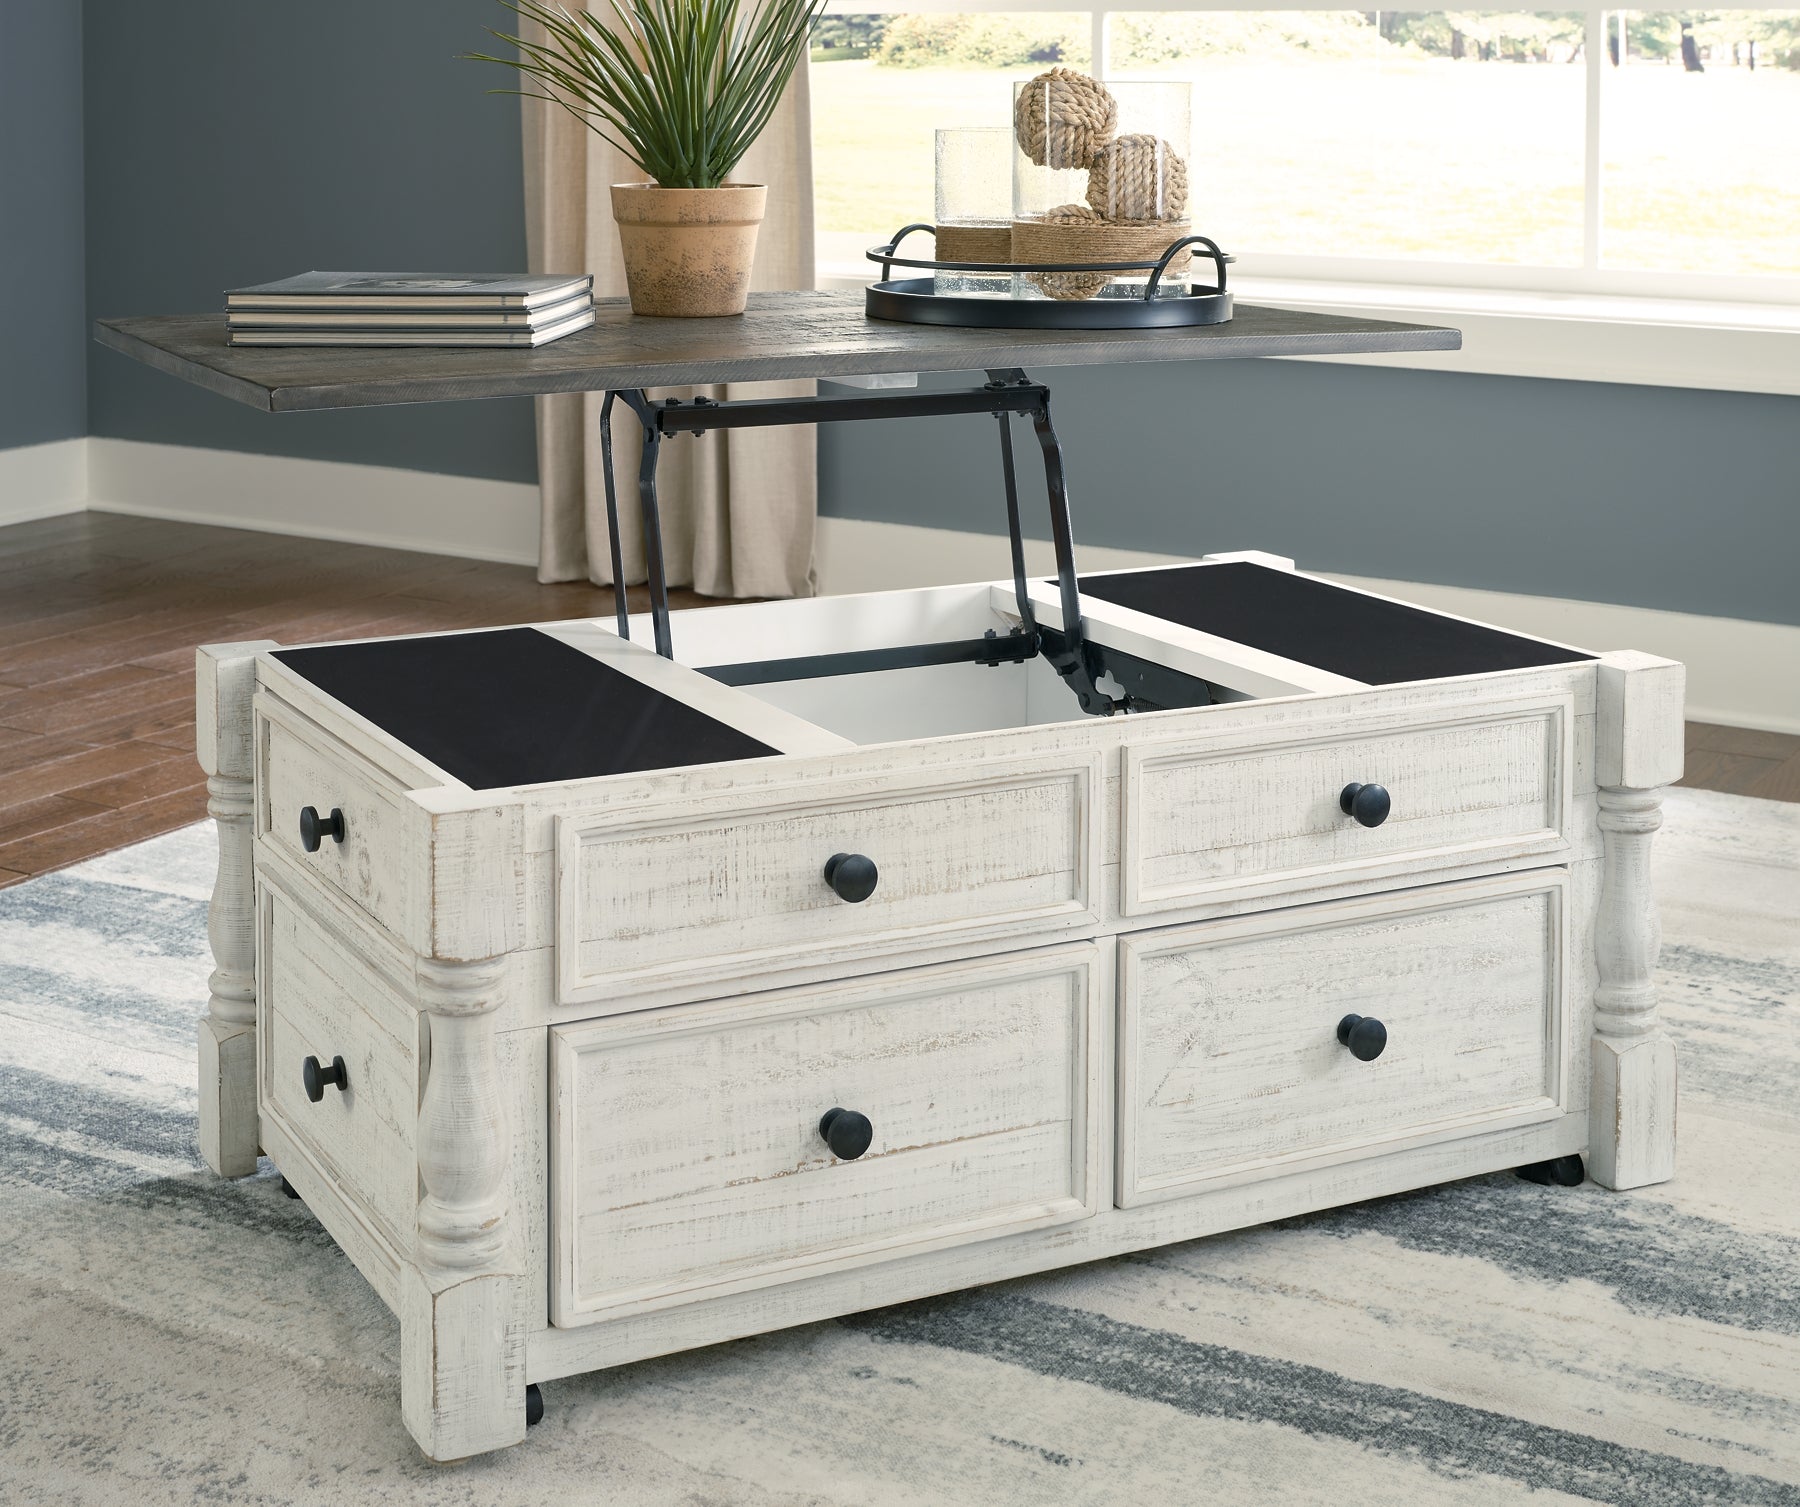 Havalance Coffee Table with 2 End Tables at Cloud 9 Mattress & Furniture furniture, home furnishing, home decor